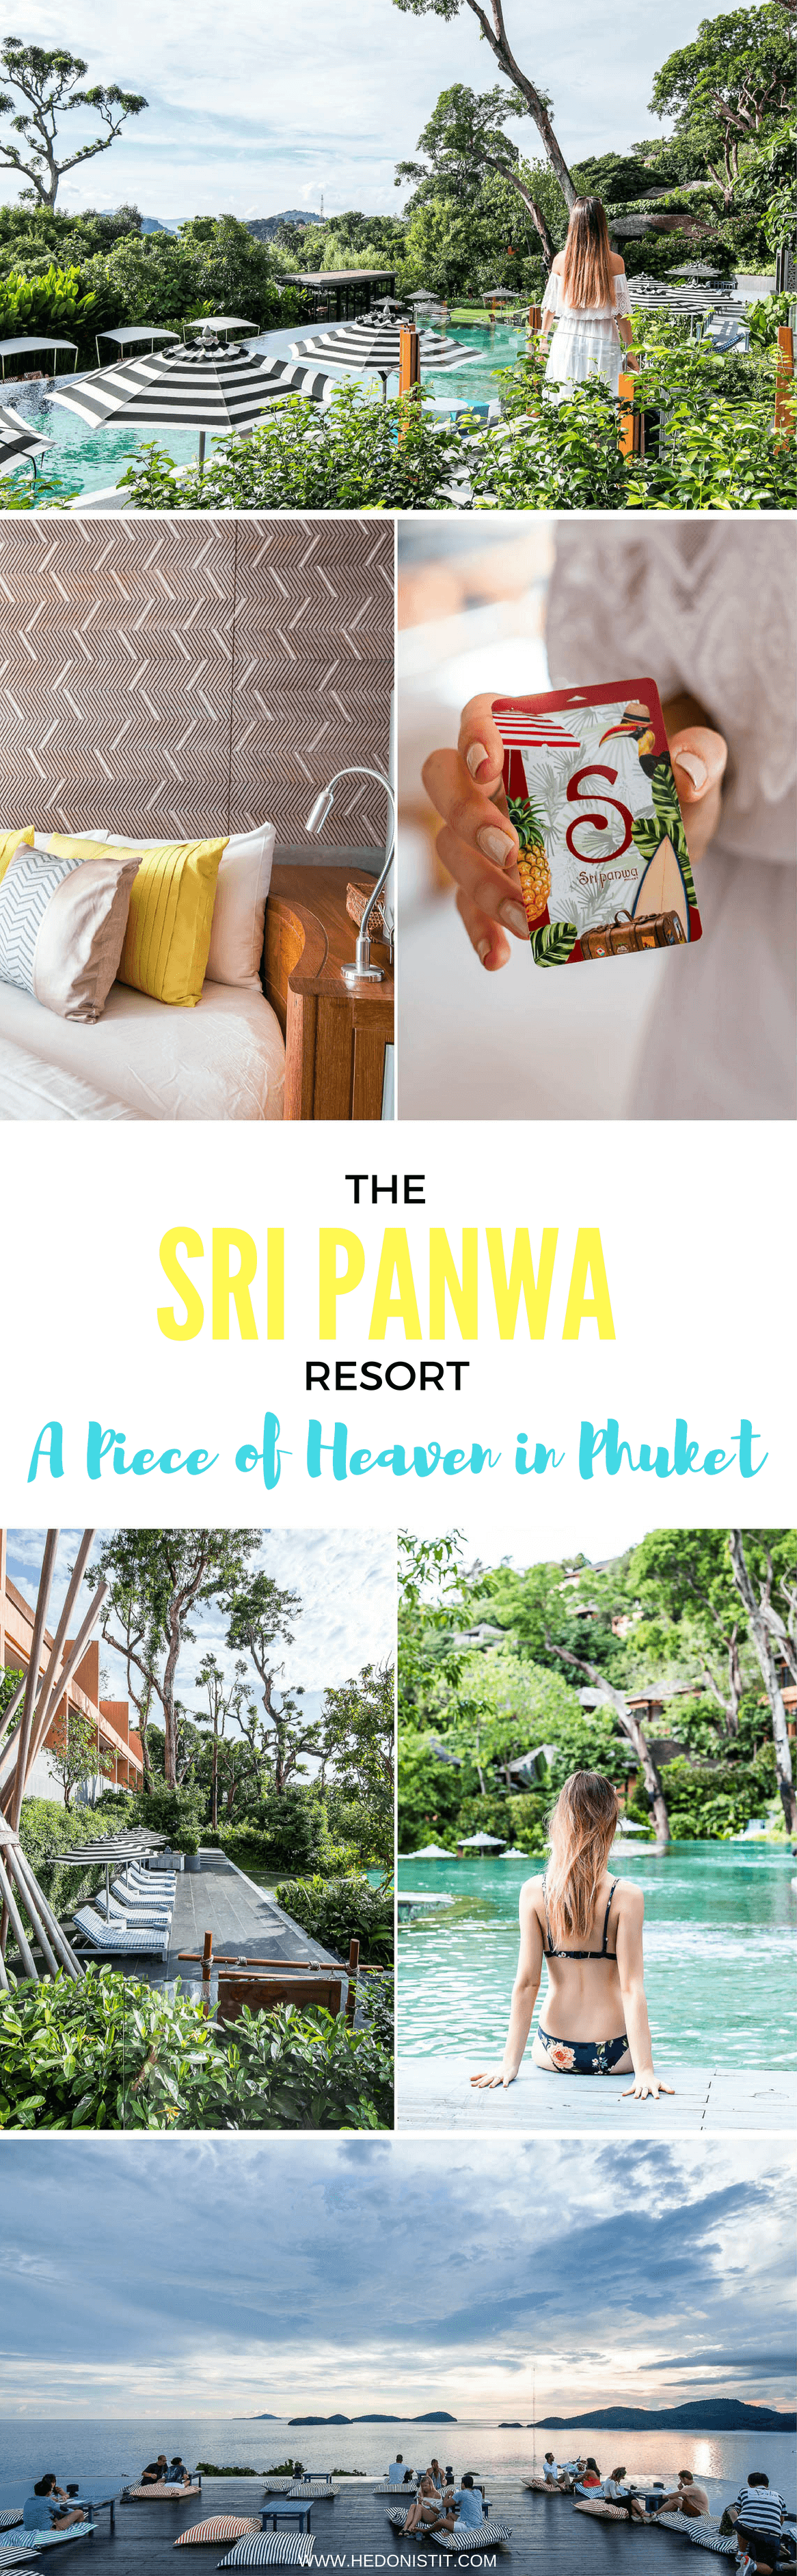 THAILAND : Sri Panwa Luxury Resort in Phuket | Amazing suites luxury hotel you have to book when traveling to Phuket for your honeymoon | Places to stay in Thailand | Travel destinations to add to your bucket list | | Visit us @ hedonistit.com for more!